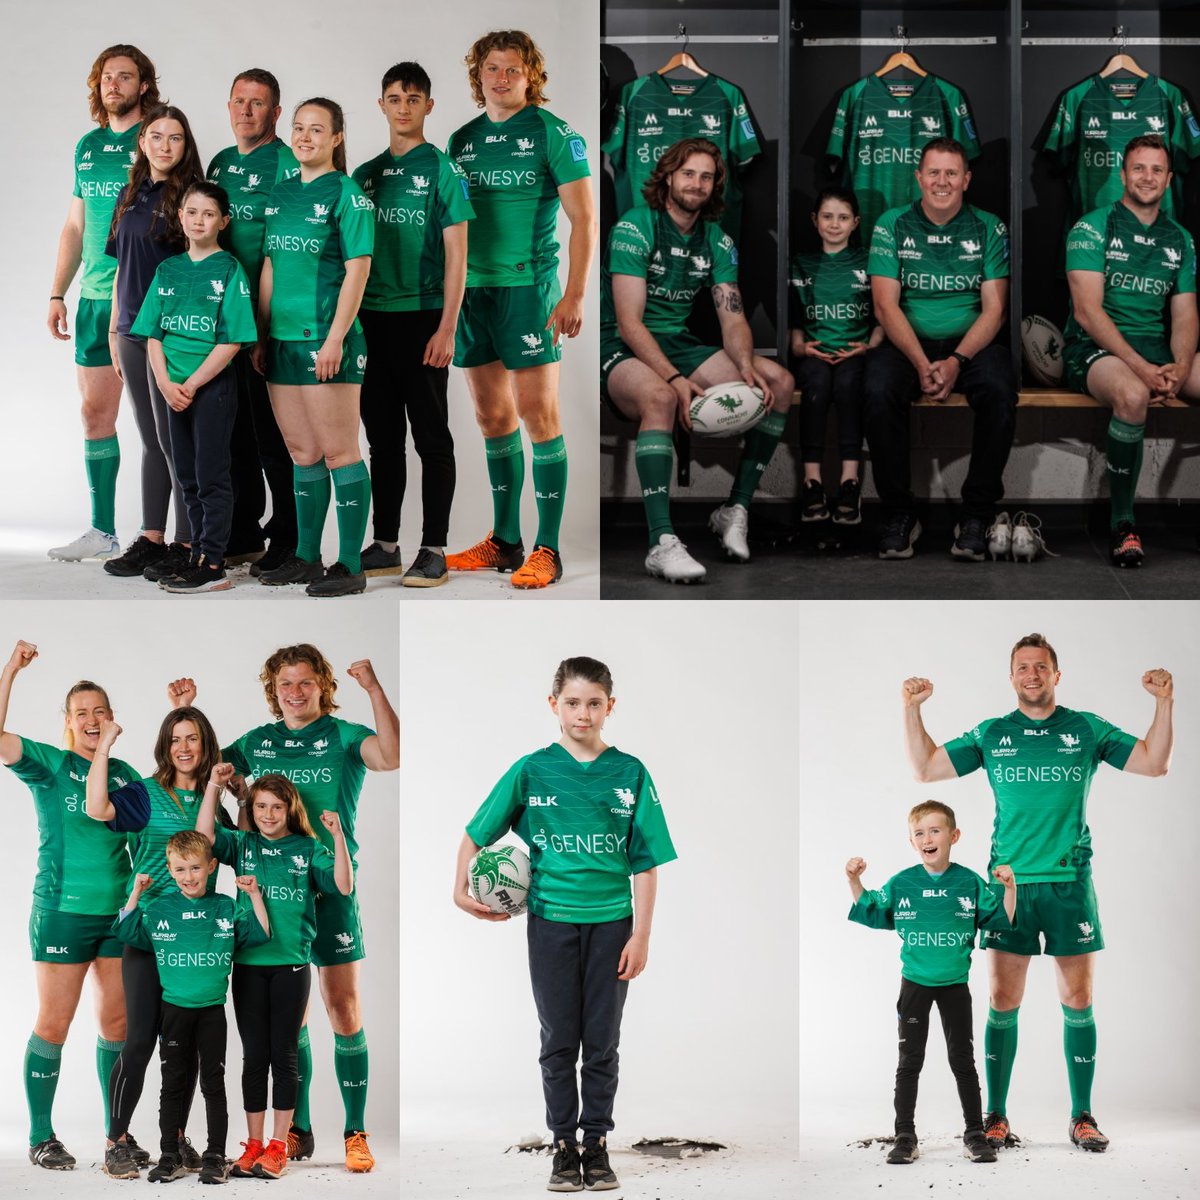 Maith sibh uilig! 🟢🏉

🟢🏉Oughterard Rugby  were recently asked to help Connacht Rugby and Connacht Women's Rugby with their kit launch day

🟢🏉The #OughterardRFC members had a great day meeting the players!

👏🏽Comhghairdeas libh!

#irishrugby #connachtrugby #rugby #NewKitDay